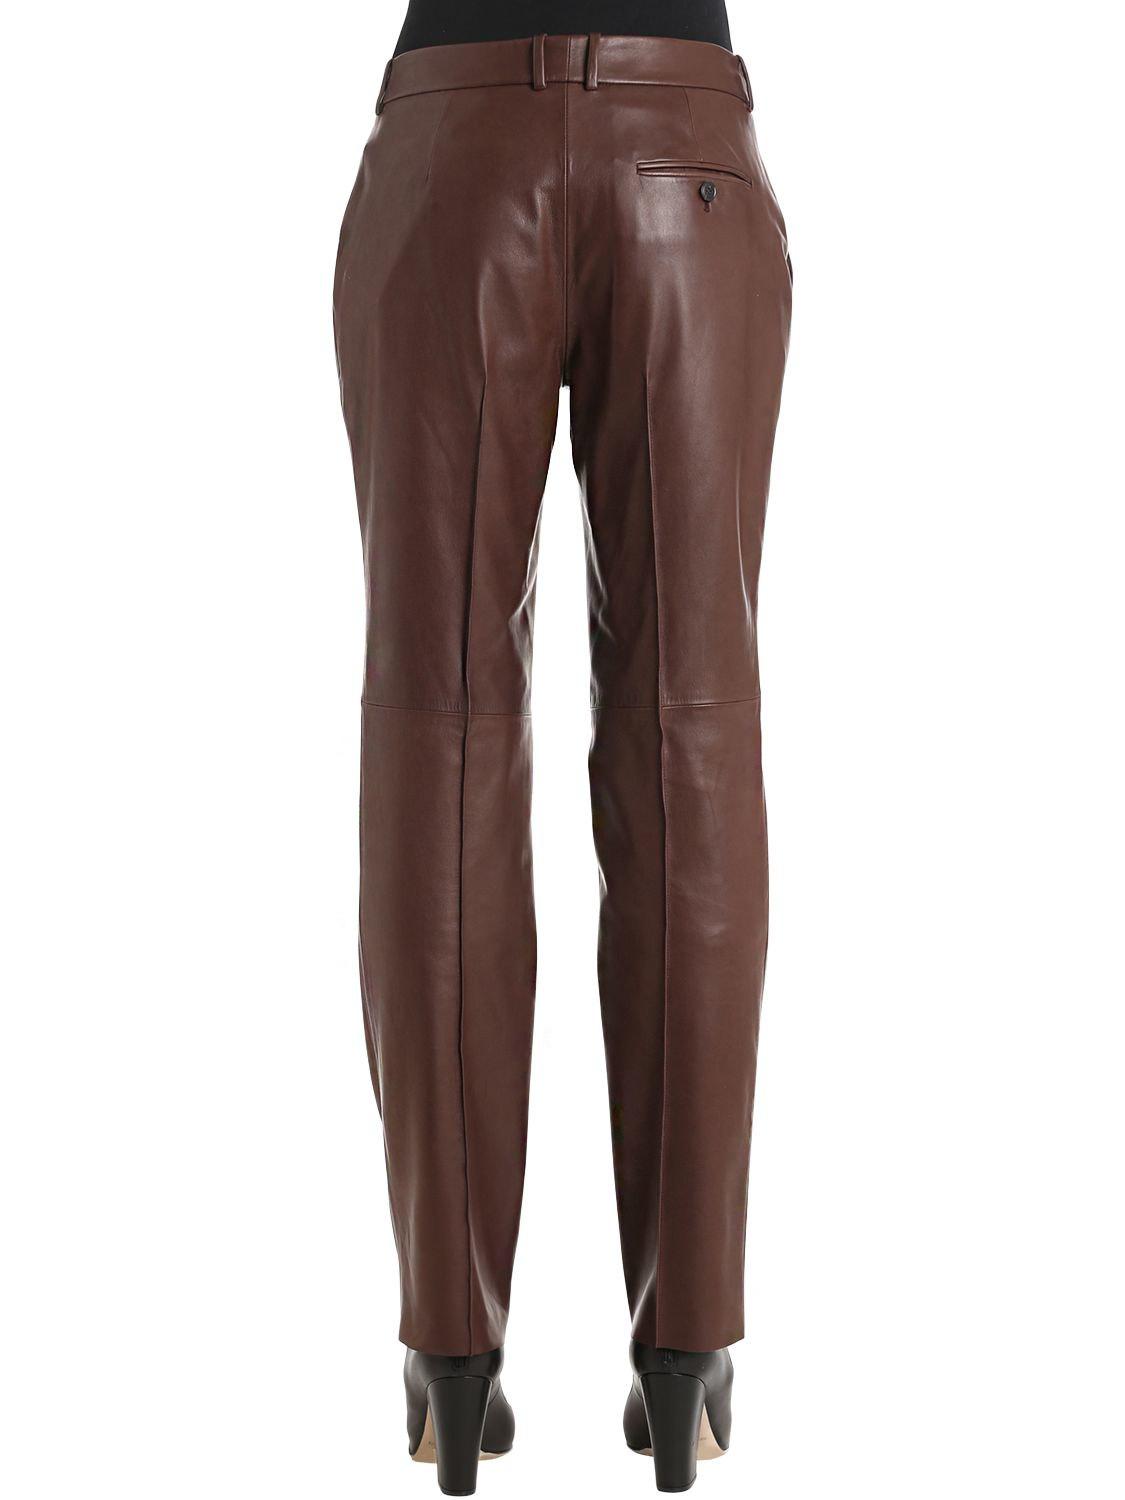 Ferragamo Natural Leather Pants in Brown - Lyst